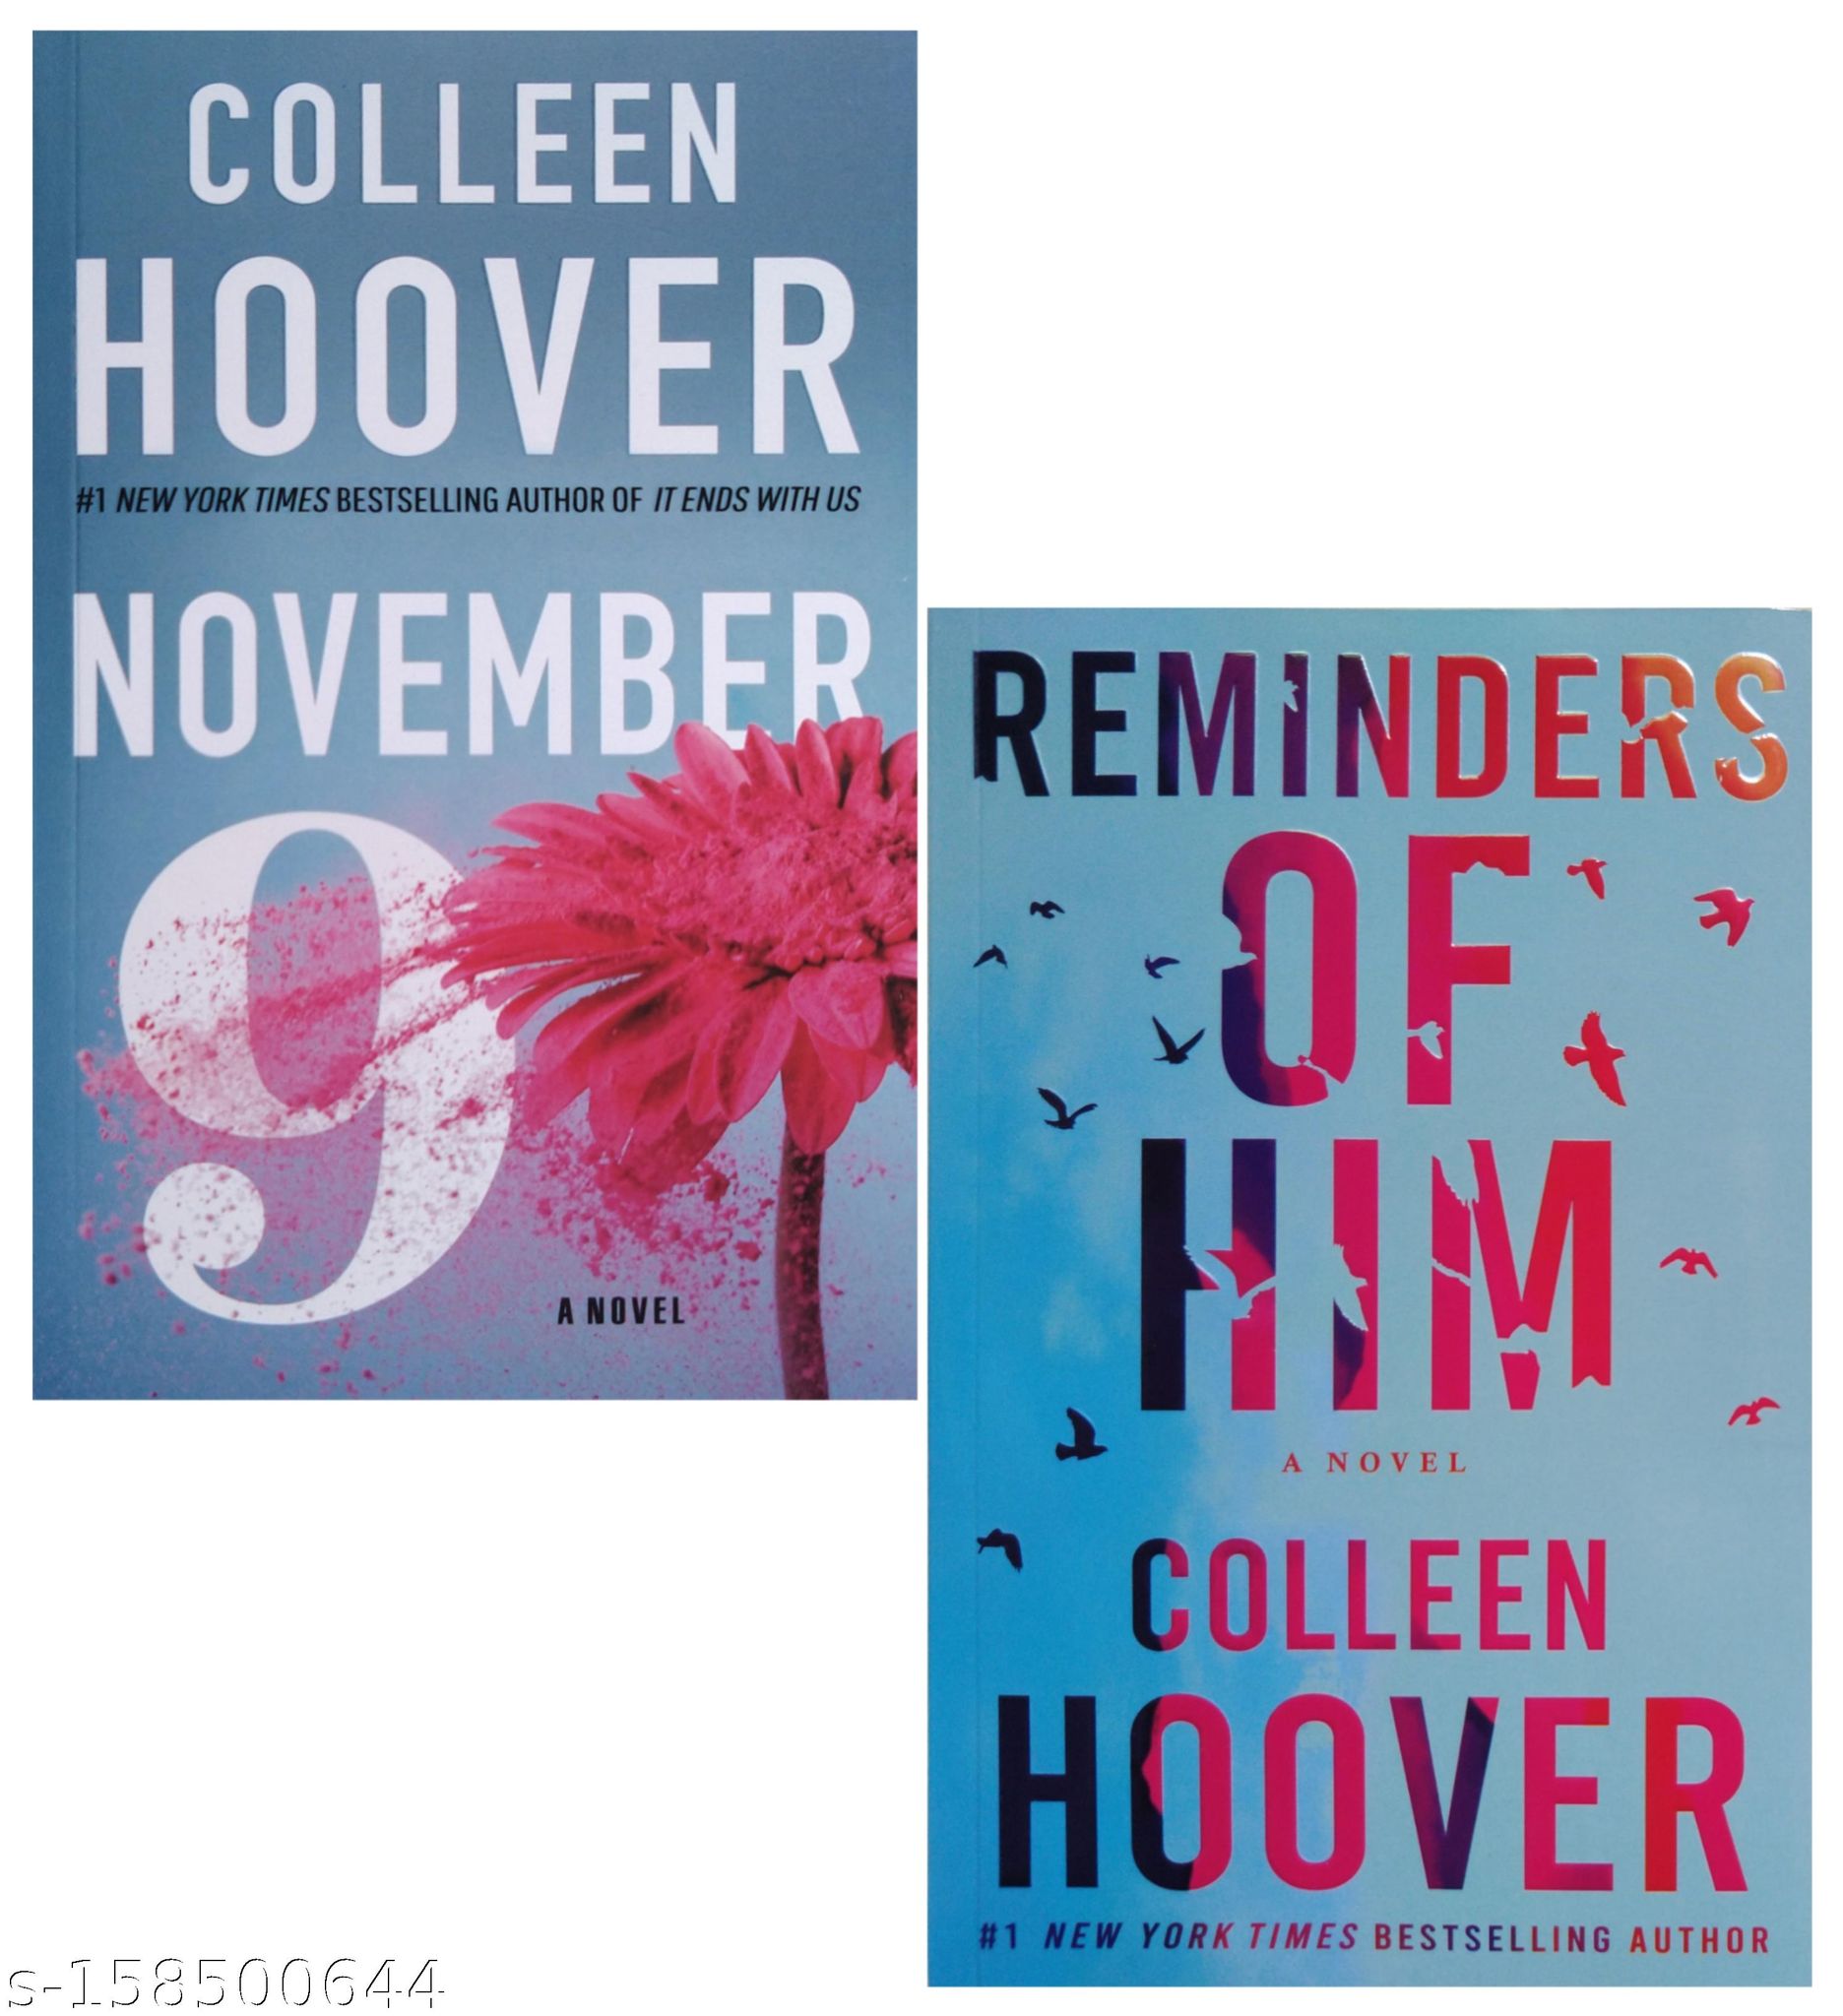 Reminders of Him + Colleen Hoover November 9